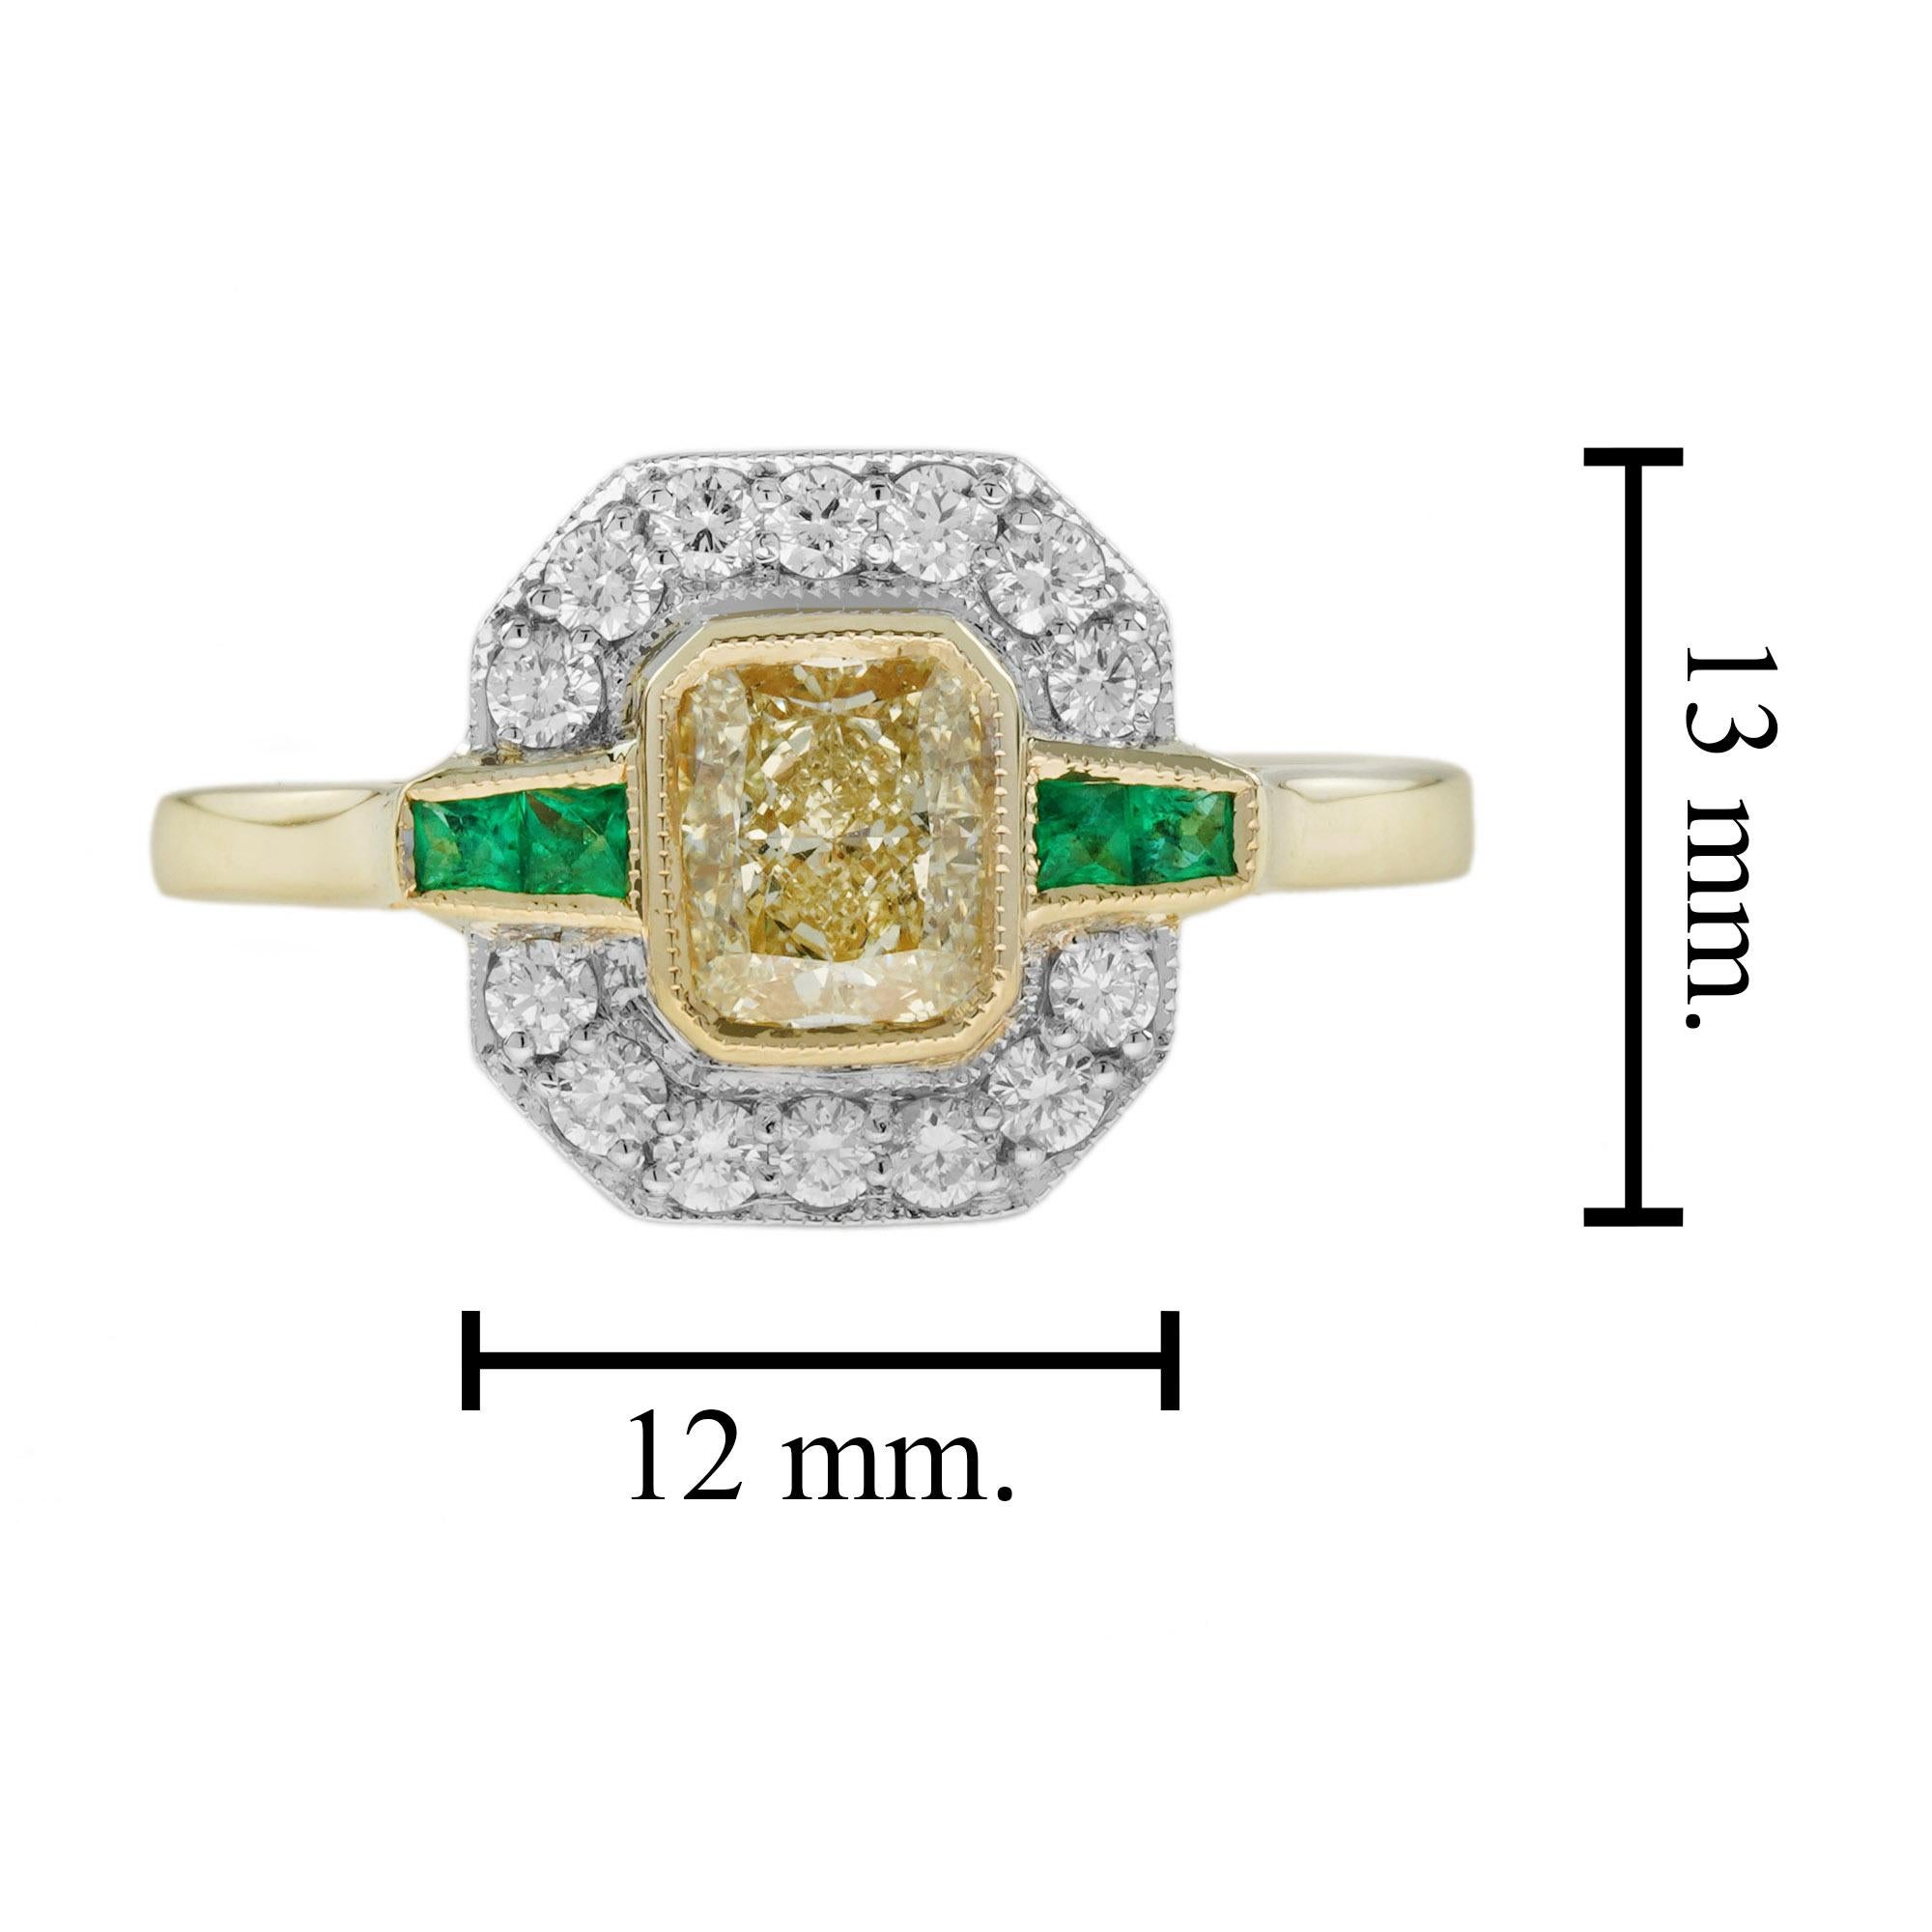 GIA Diamond and Emerald Art Deco Style Engagement Ring in 18K Yellow Gold For Sale 2